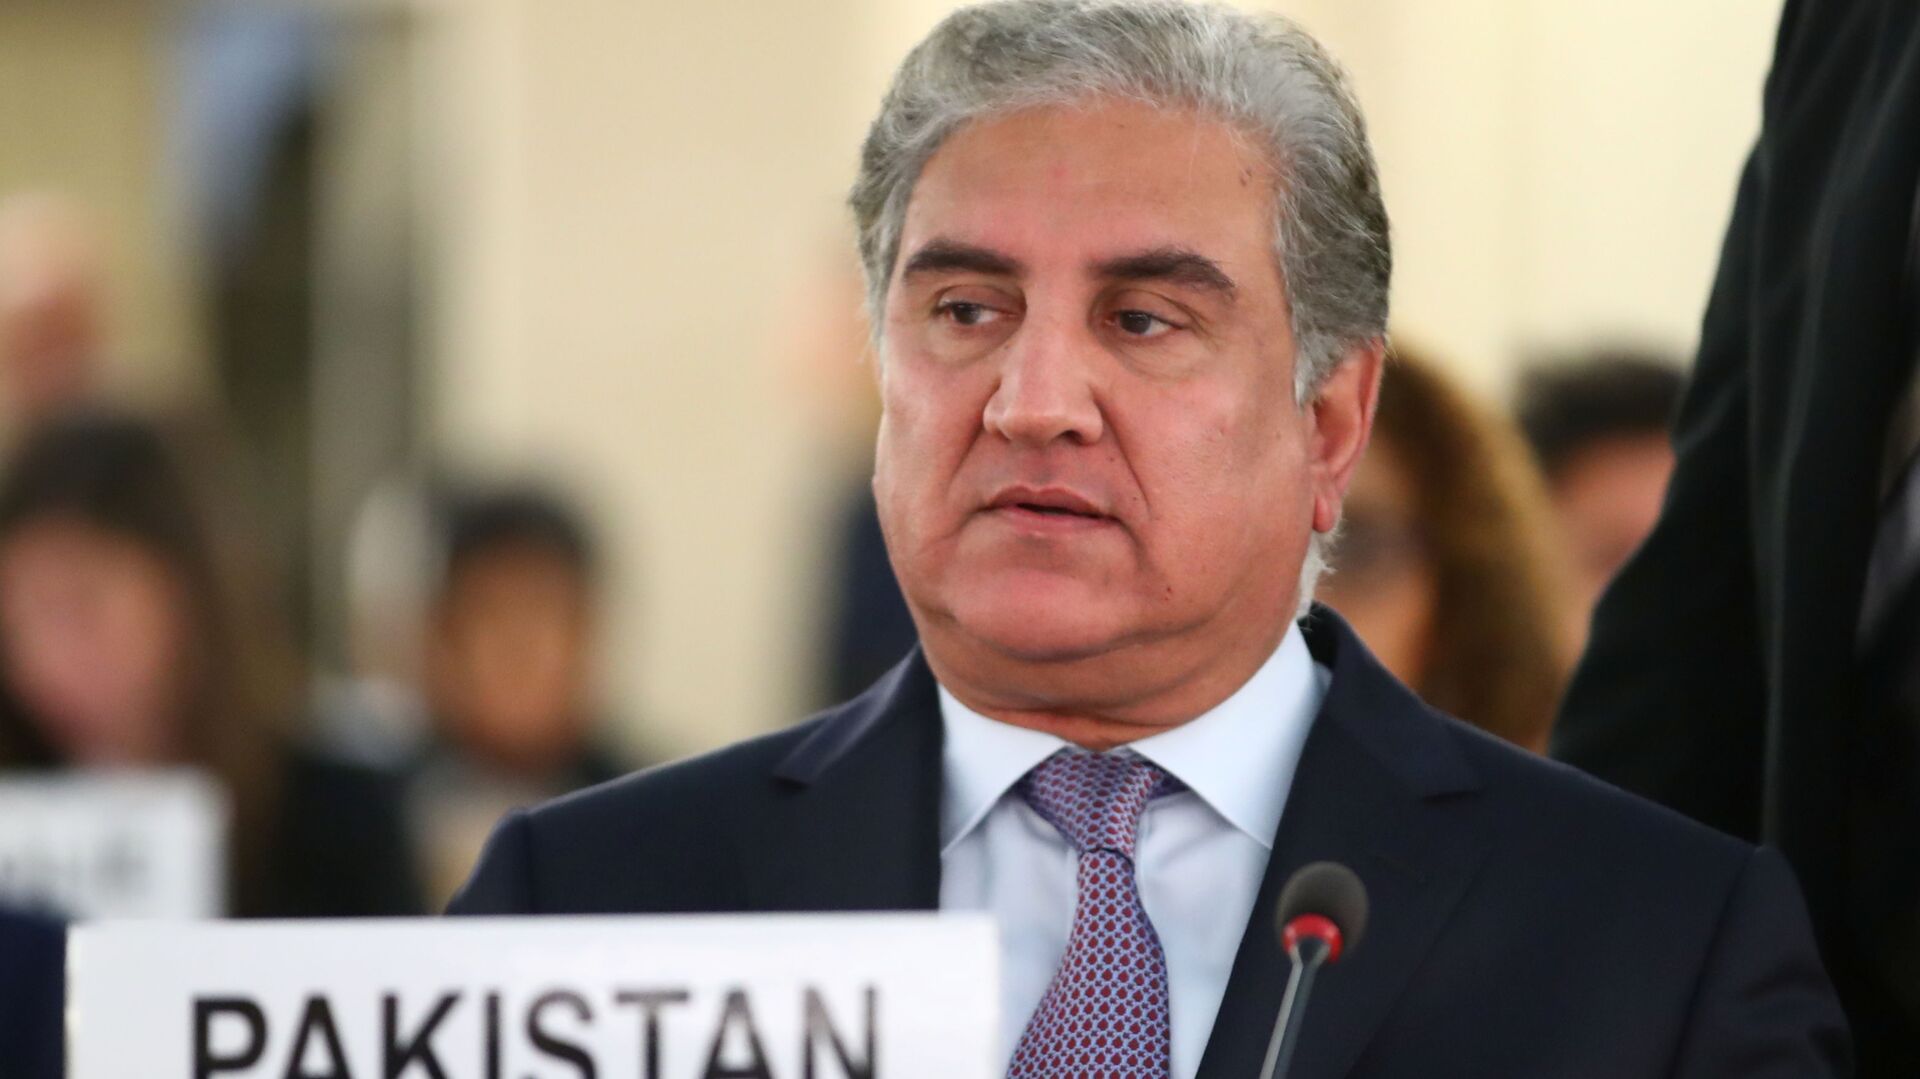 Pakistan foreign minister Shah Mehmood Qureshi arrives to address the United Nations Human Rights Council in Geneva, Switzerland, September 10, 2019 - اسپوتنیک افغانستان  , 1920, 18.12.2021